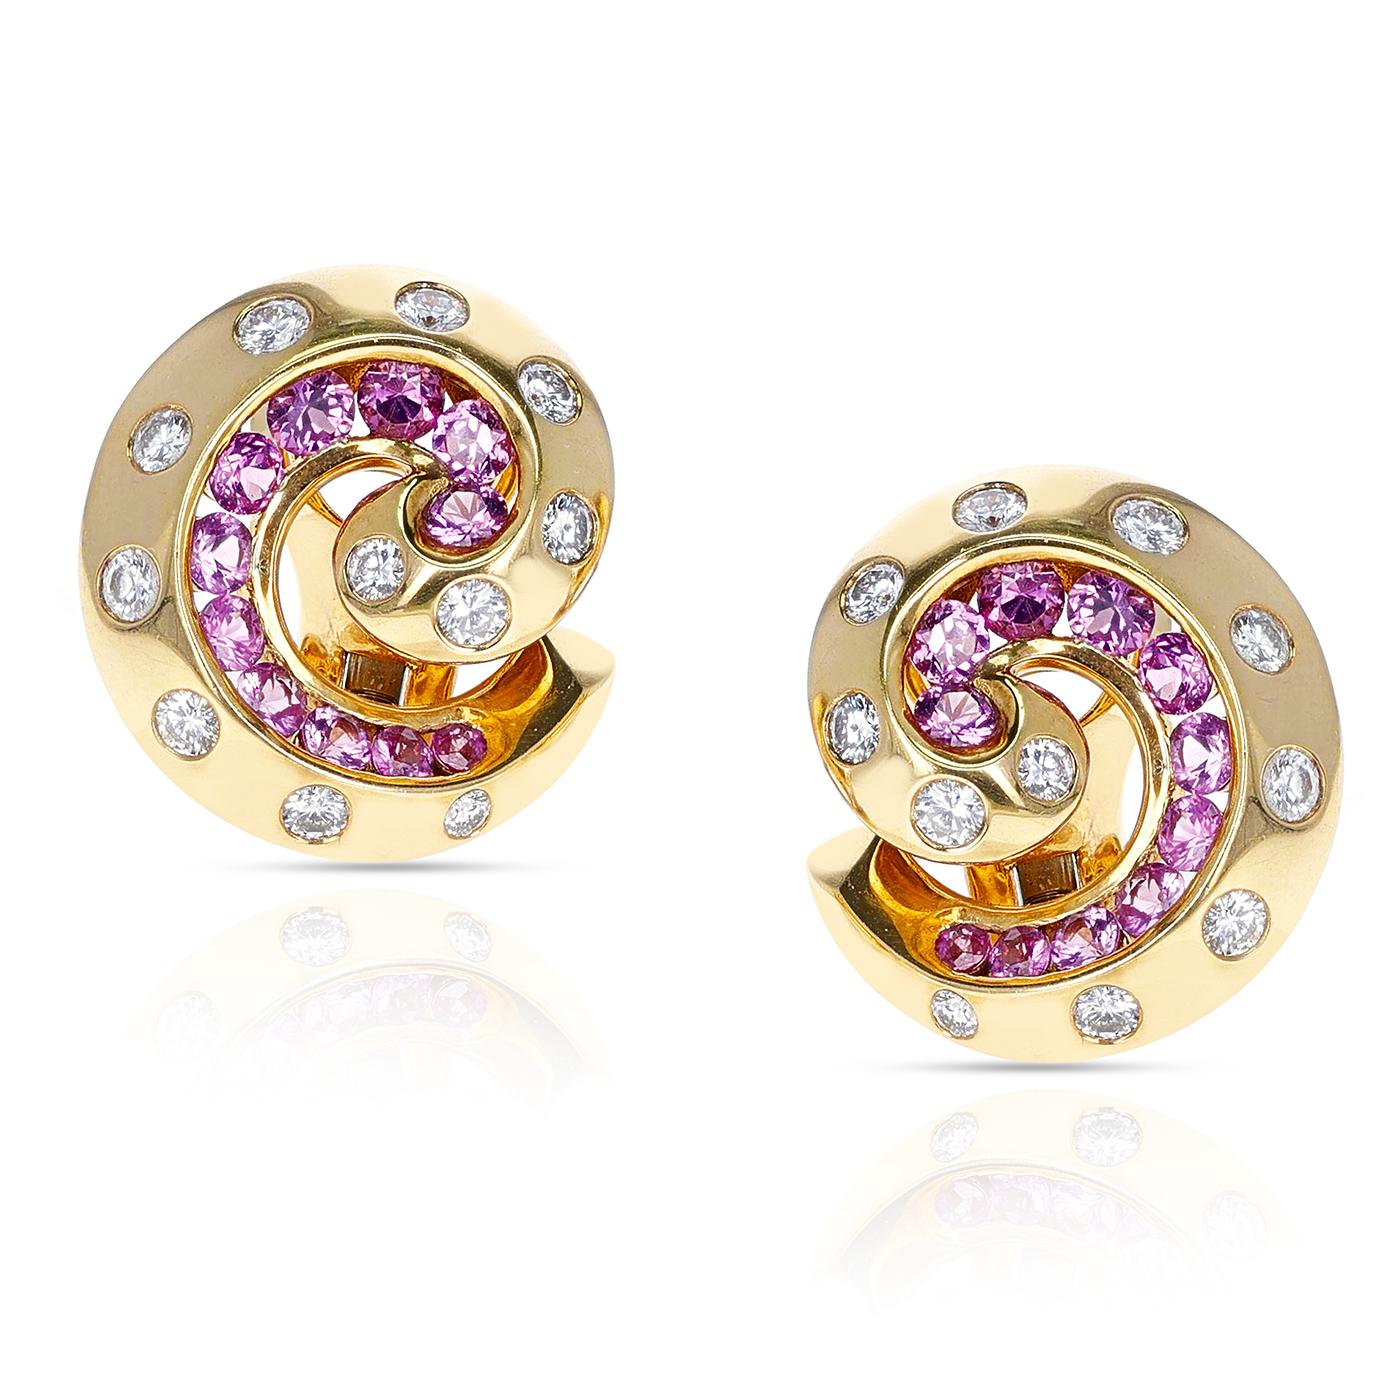 A beautiful French Van Cleef & Arpels Retro Pink Sapphire and Diamond Swirl Earrings made in 18 Karat Yellow Gold. The total weight is 16.98 grams and the dimensions are 7/8